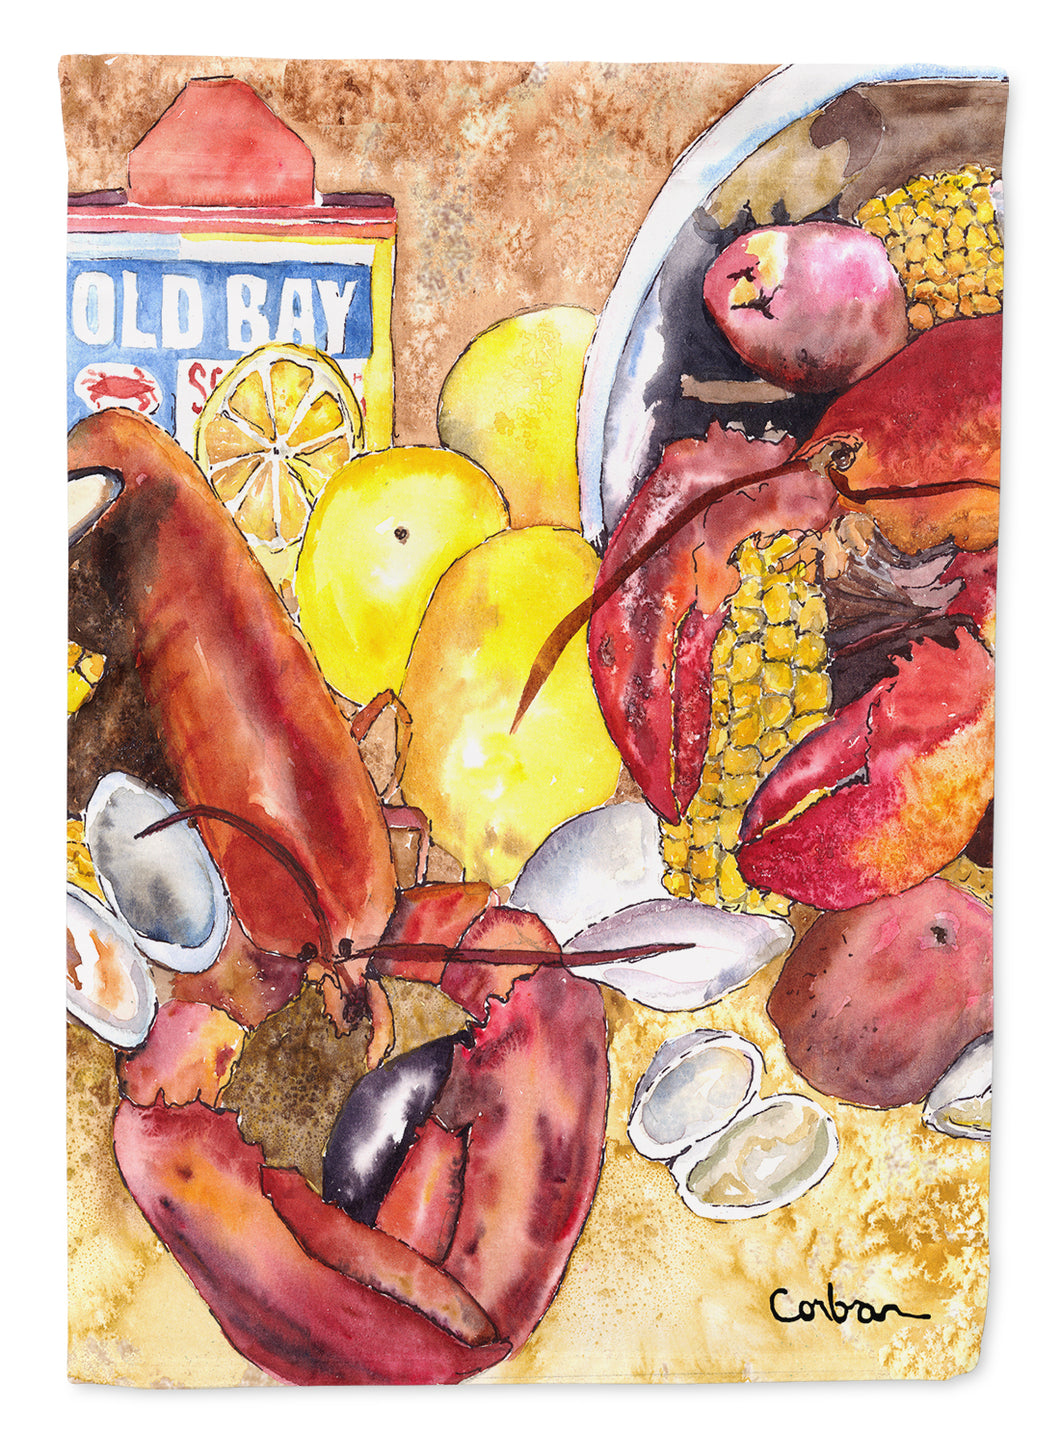 11 x 15 1/2 in. Polyester Lobster Lobster Bake with Old Bay Seasonings Garden Flag 2-Sided 2-Ply